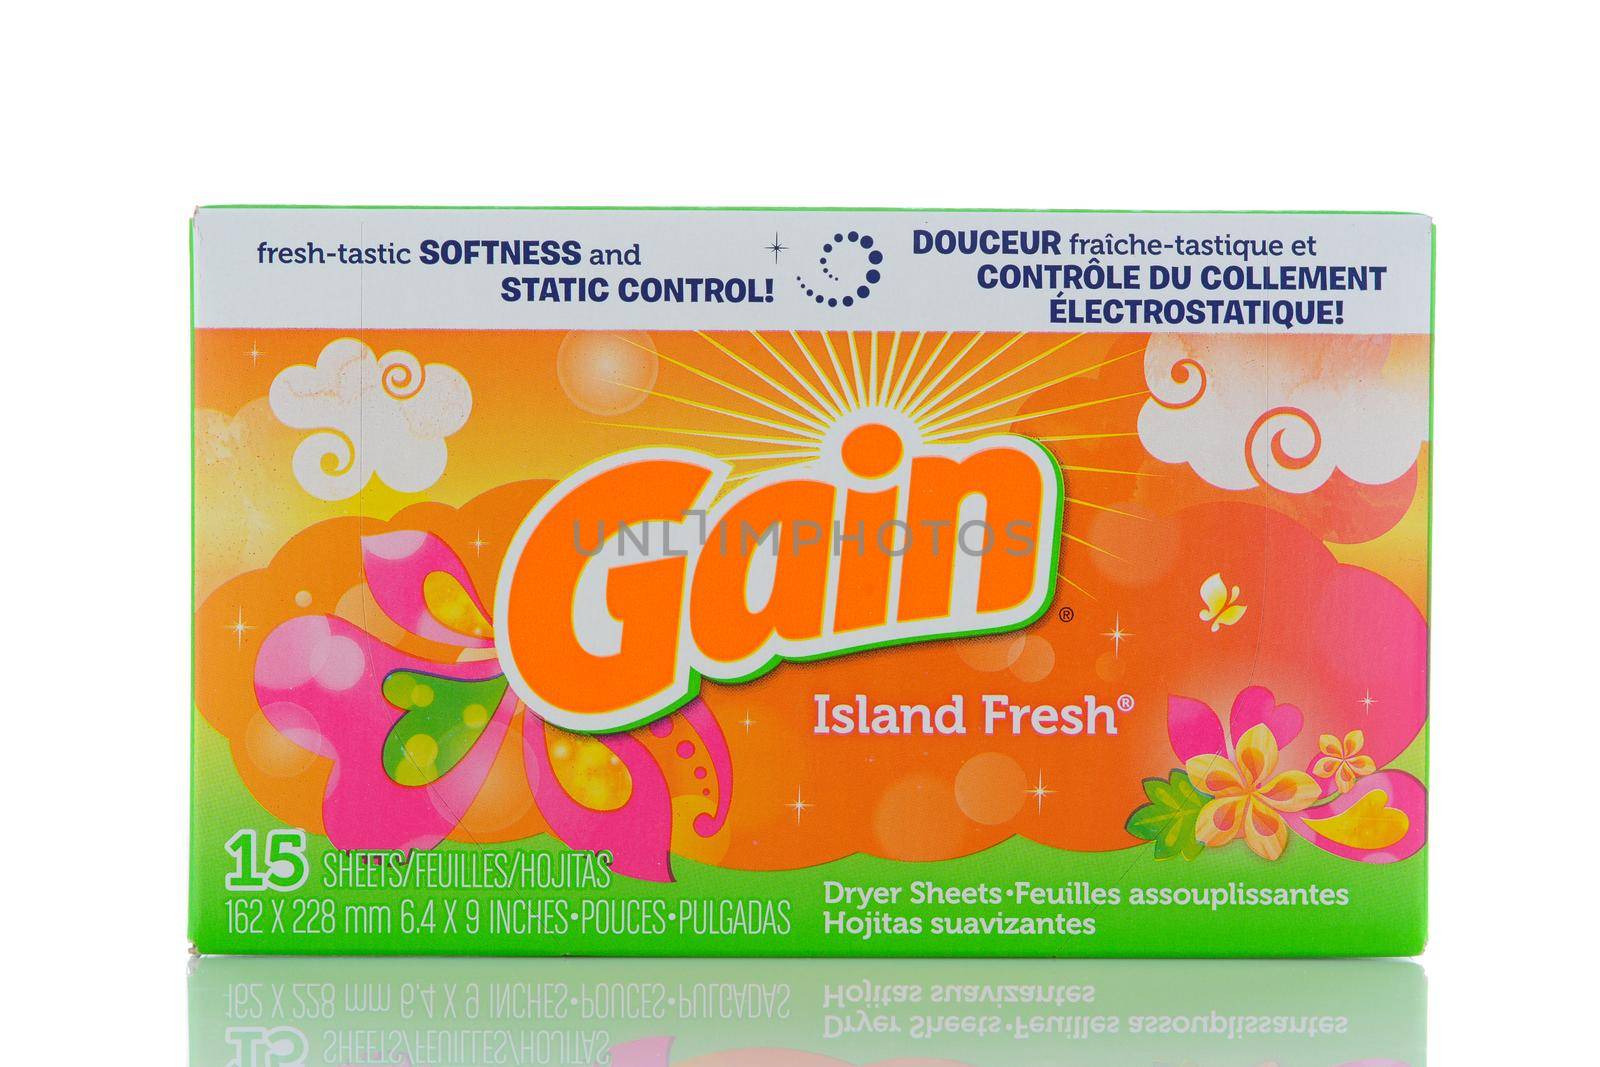 IRVINE, CALIF - SEPT 12, 2018: Gain Island Fresh Dryer Sheets from Proctor and Gamble.